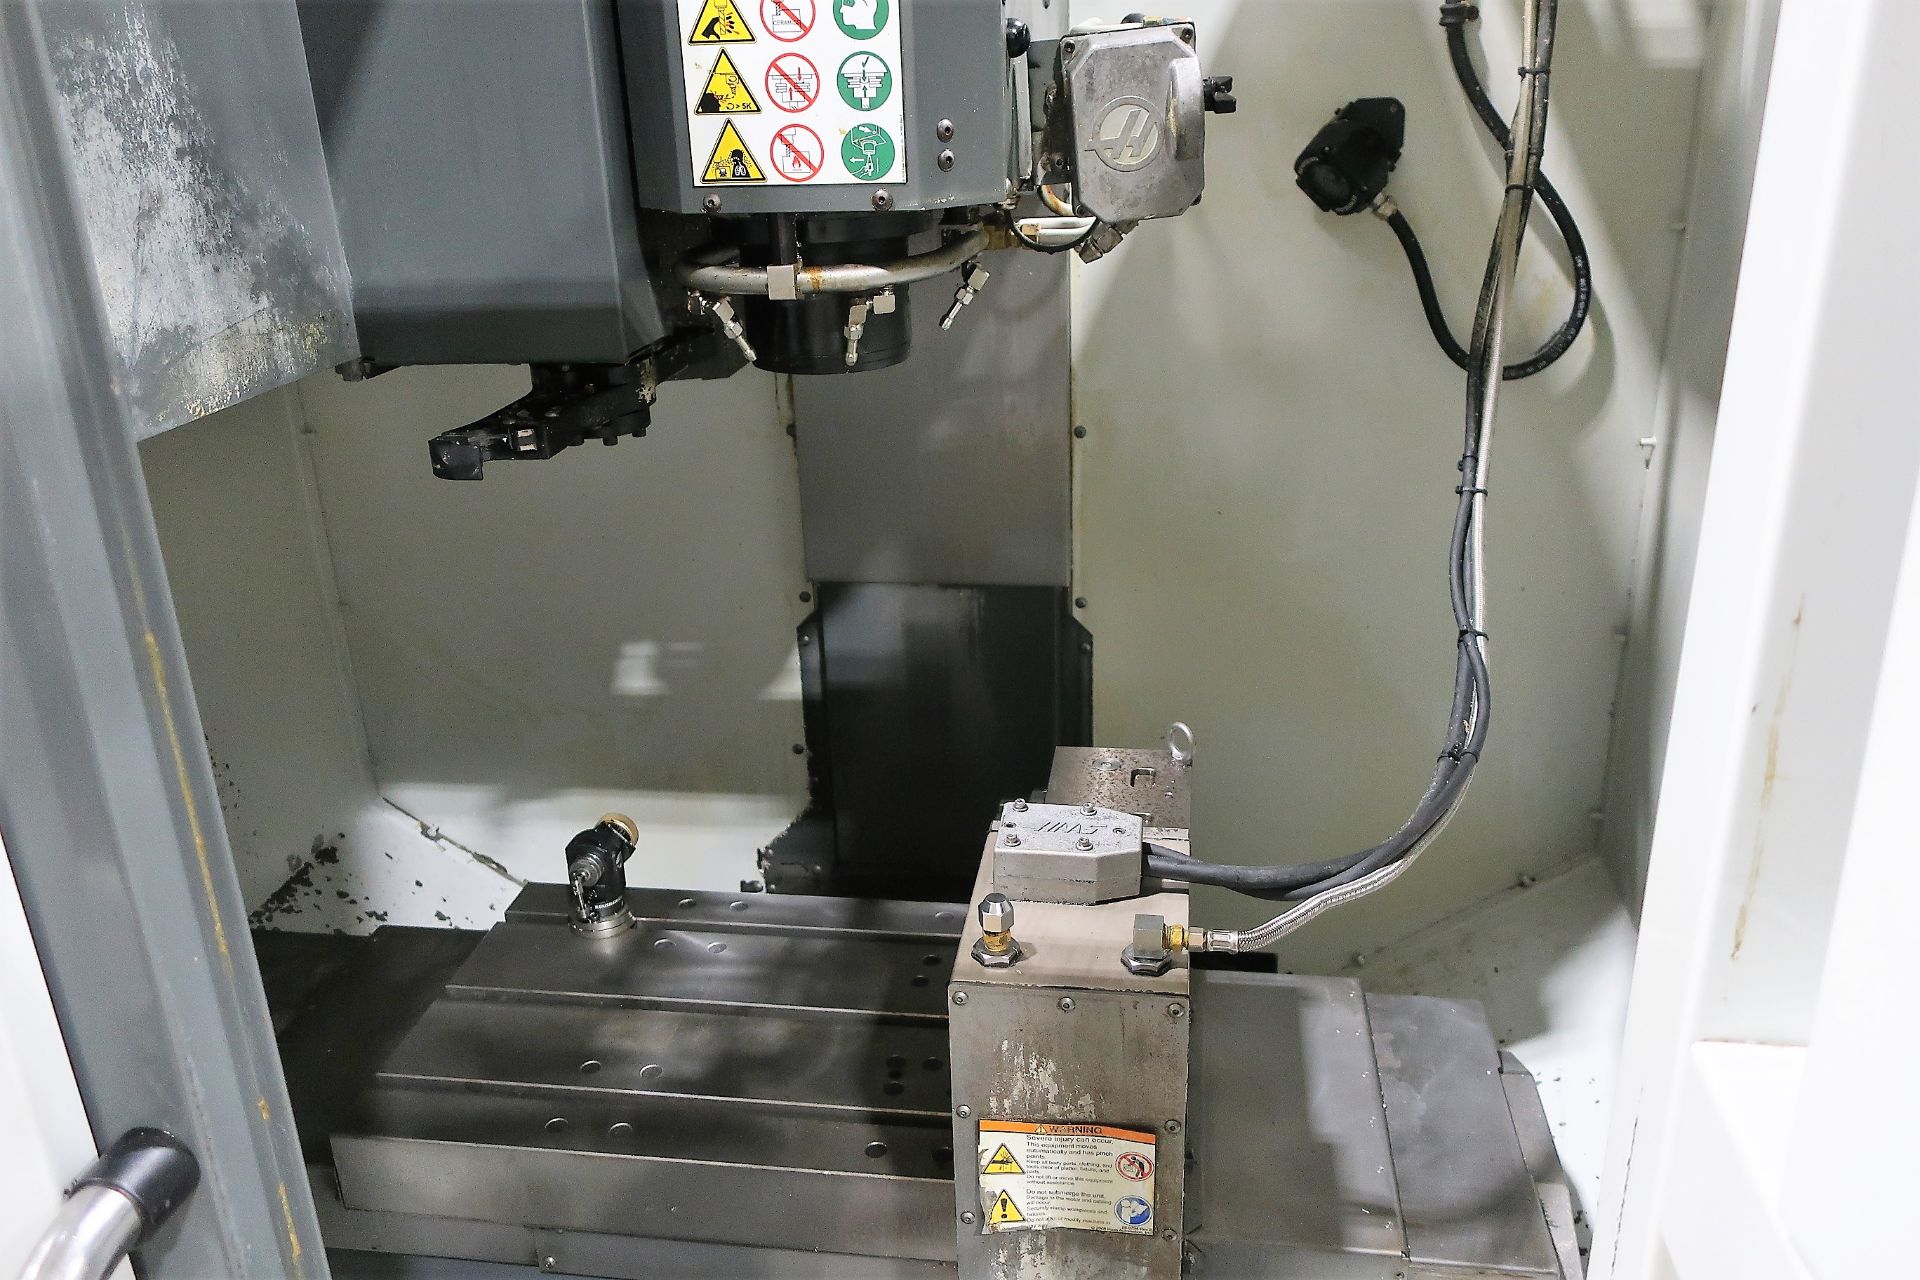 HAAS DT-1 4-AXIS CNC DRILL/TAP/VERTICAL MACHINING CENTER, S/N 1132186, New 2016 - Image 4 of 10